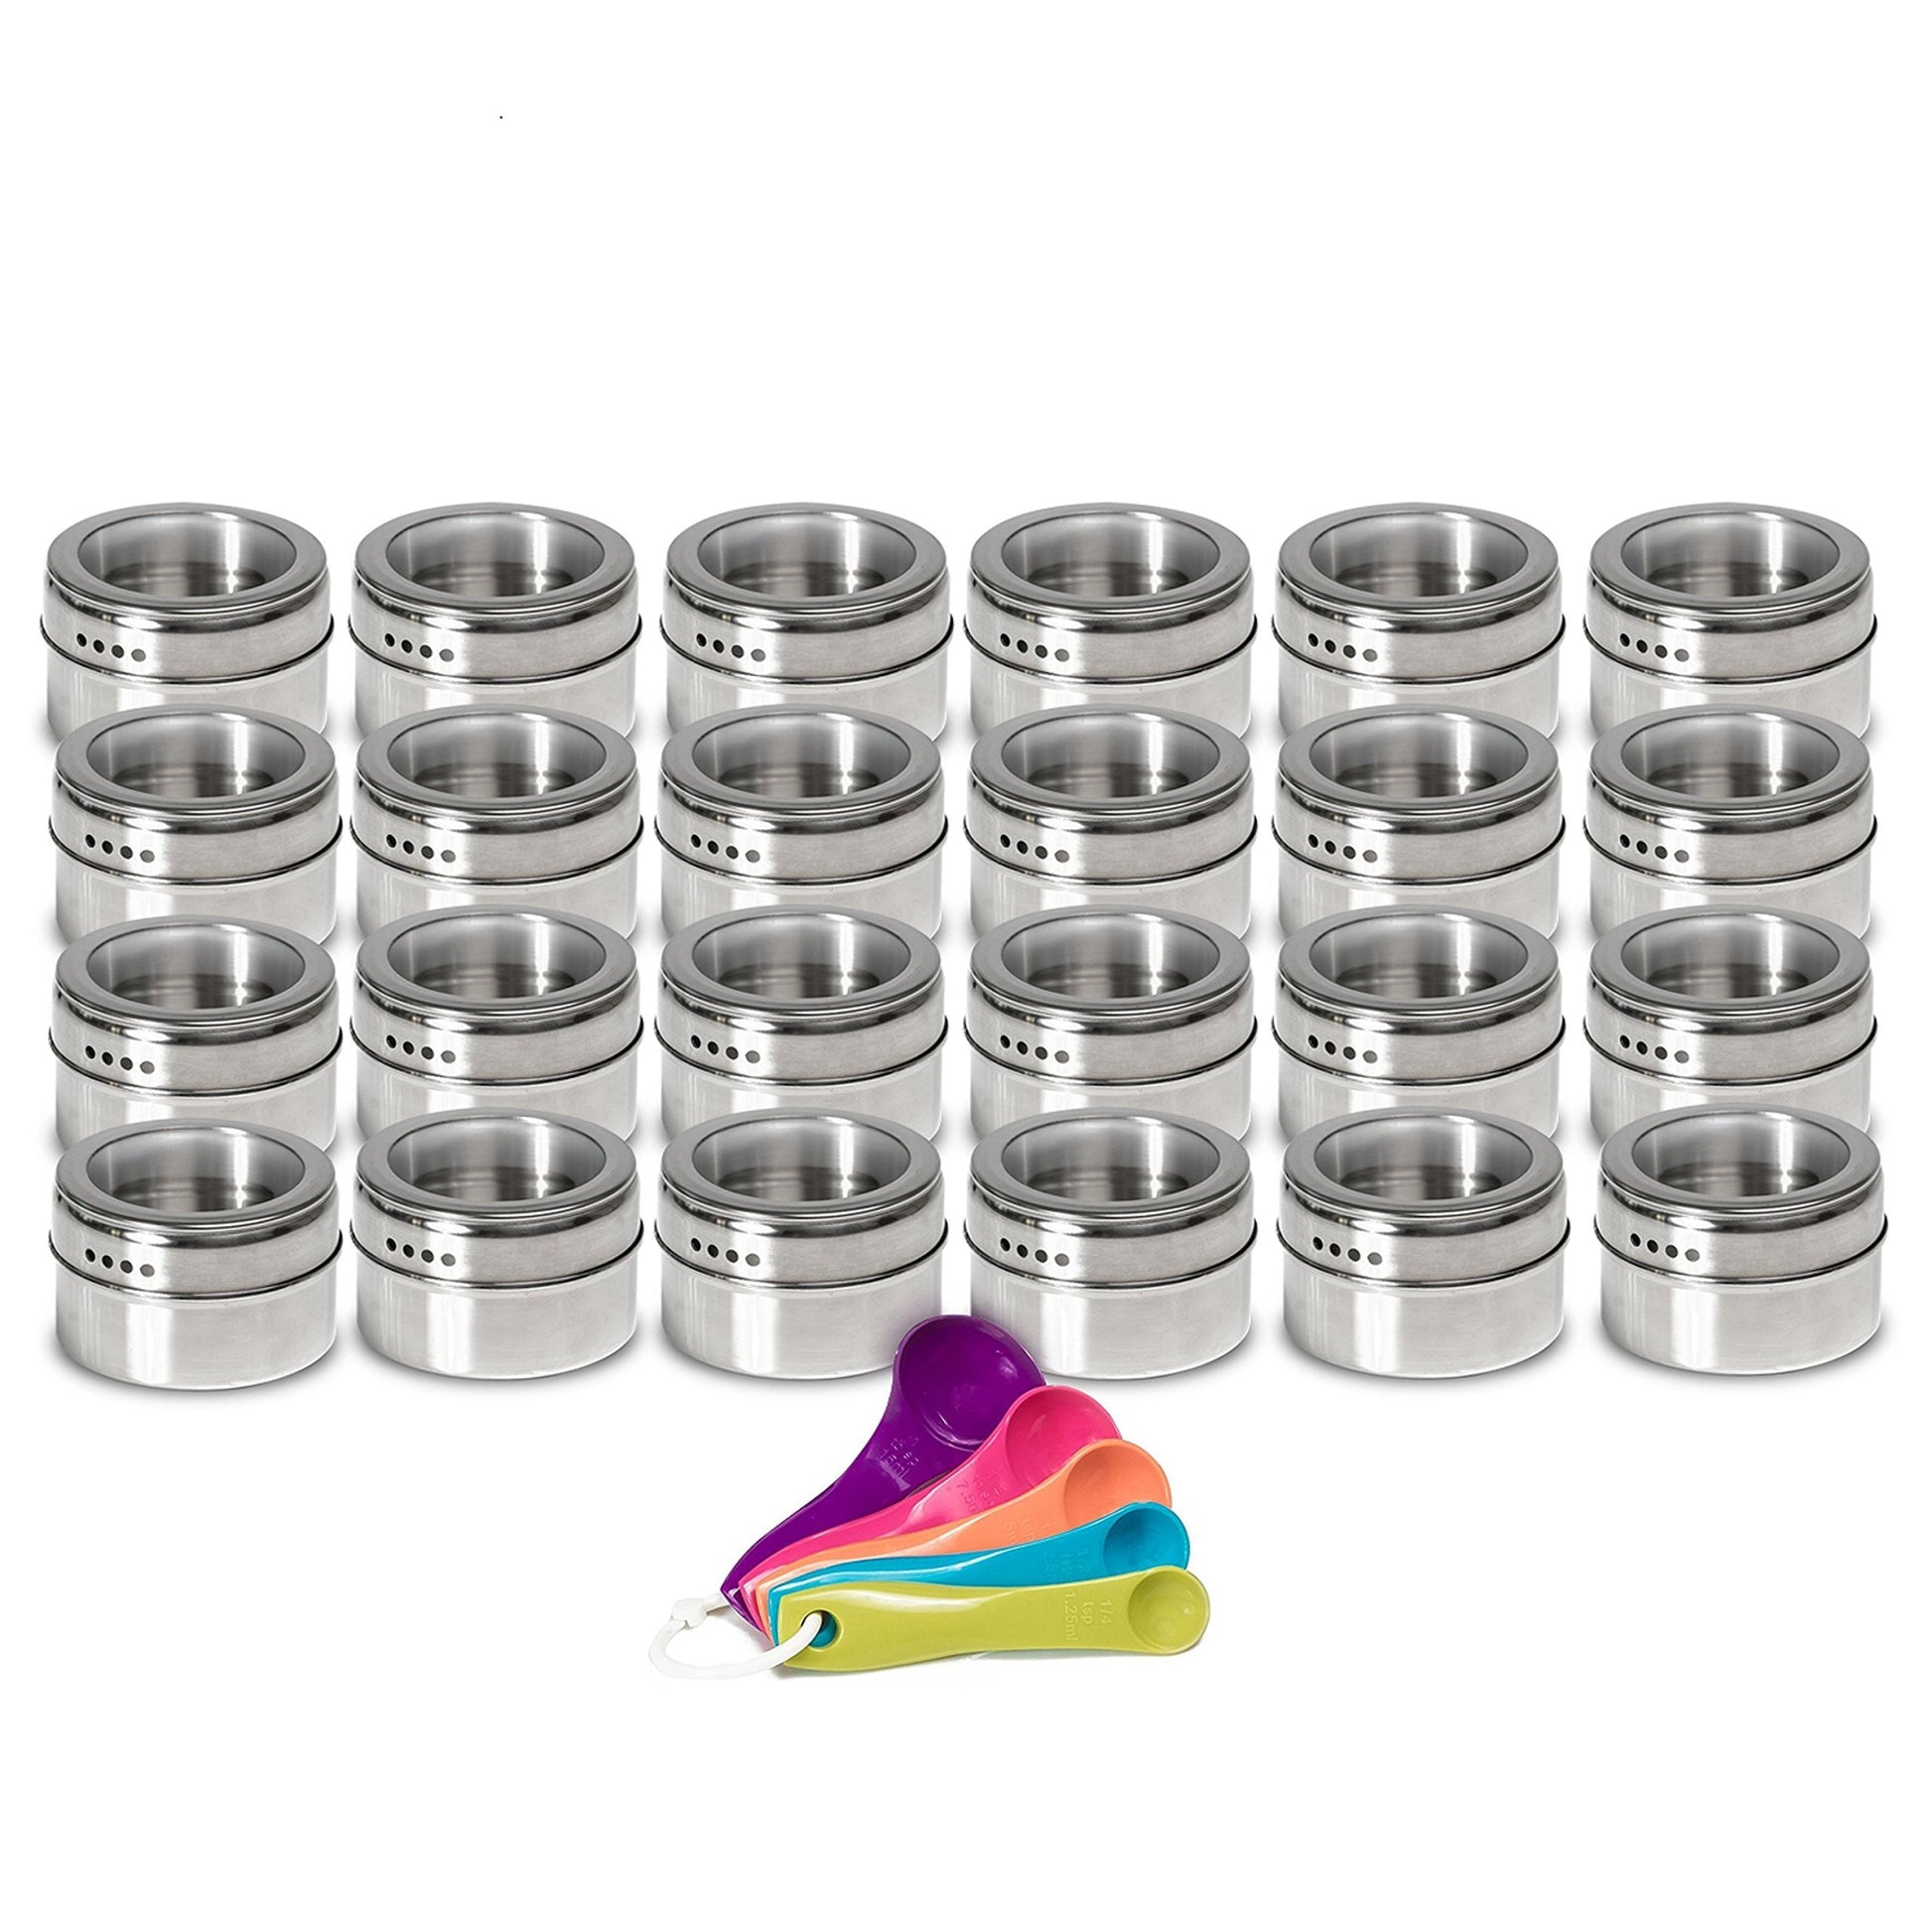 Top nellam stainless steel magnetic spice jars bonus measuring spoon set airtight kitchen storage containers stack on fridge to save counter cupboard space 24pc organizers